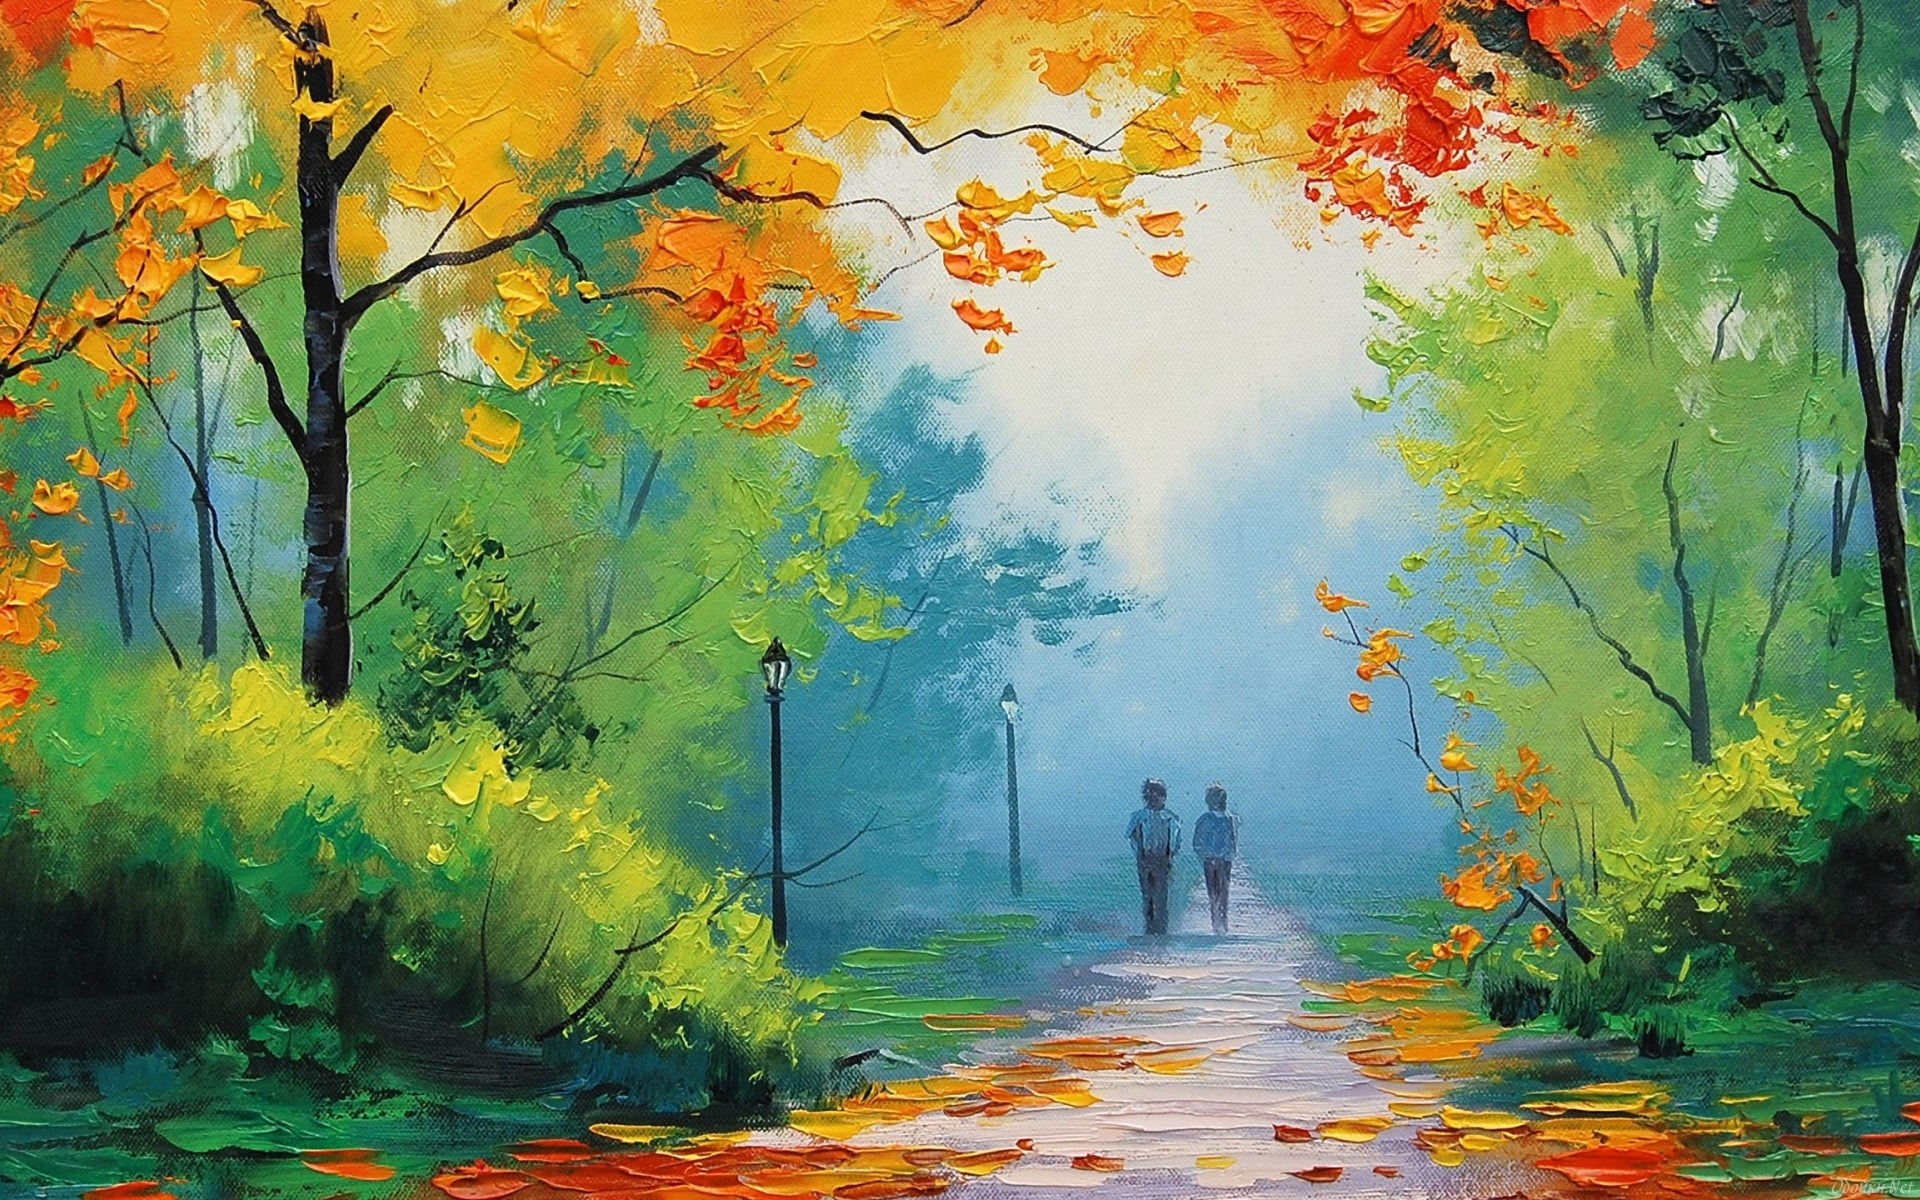 Artistic Painting Wallpapers - 1920x1200 Wallpaper 